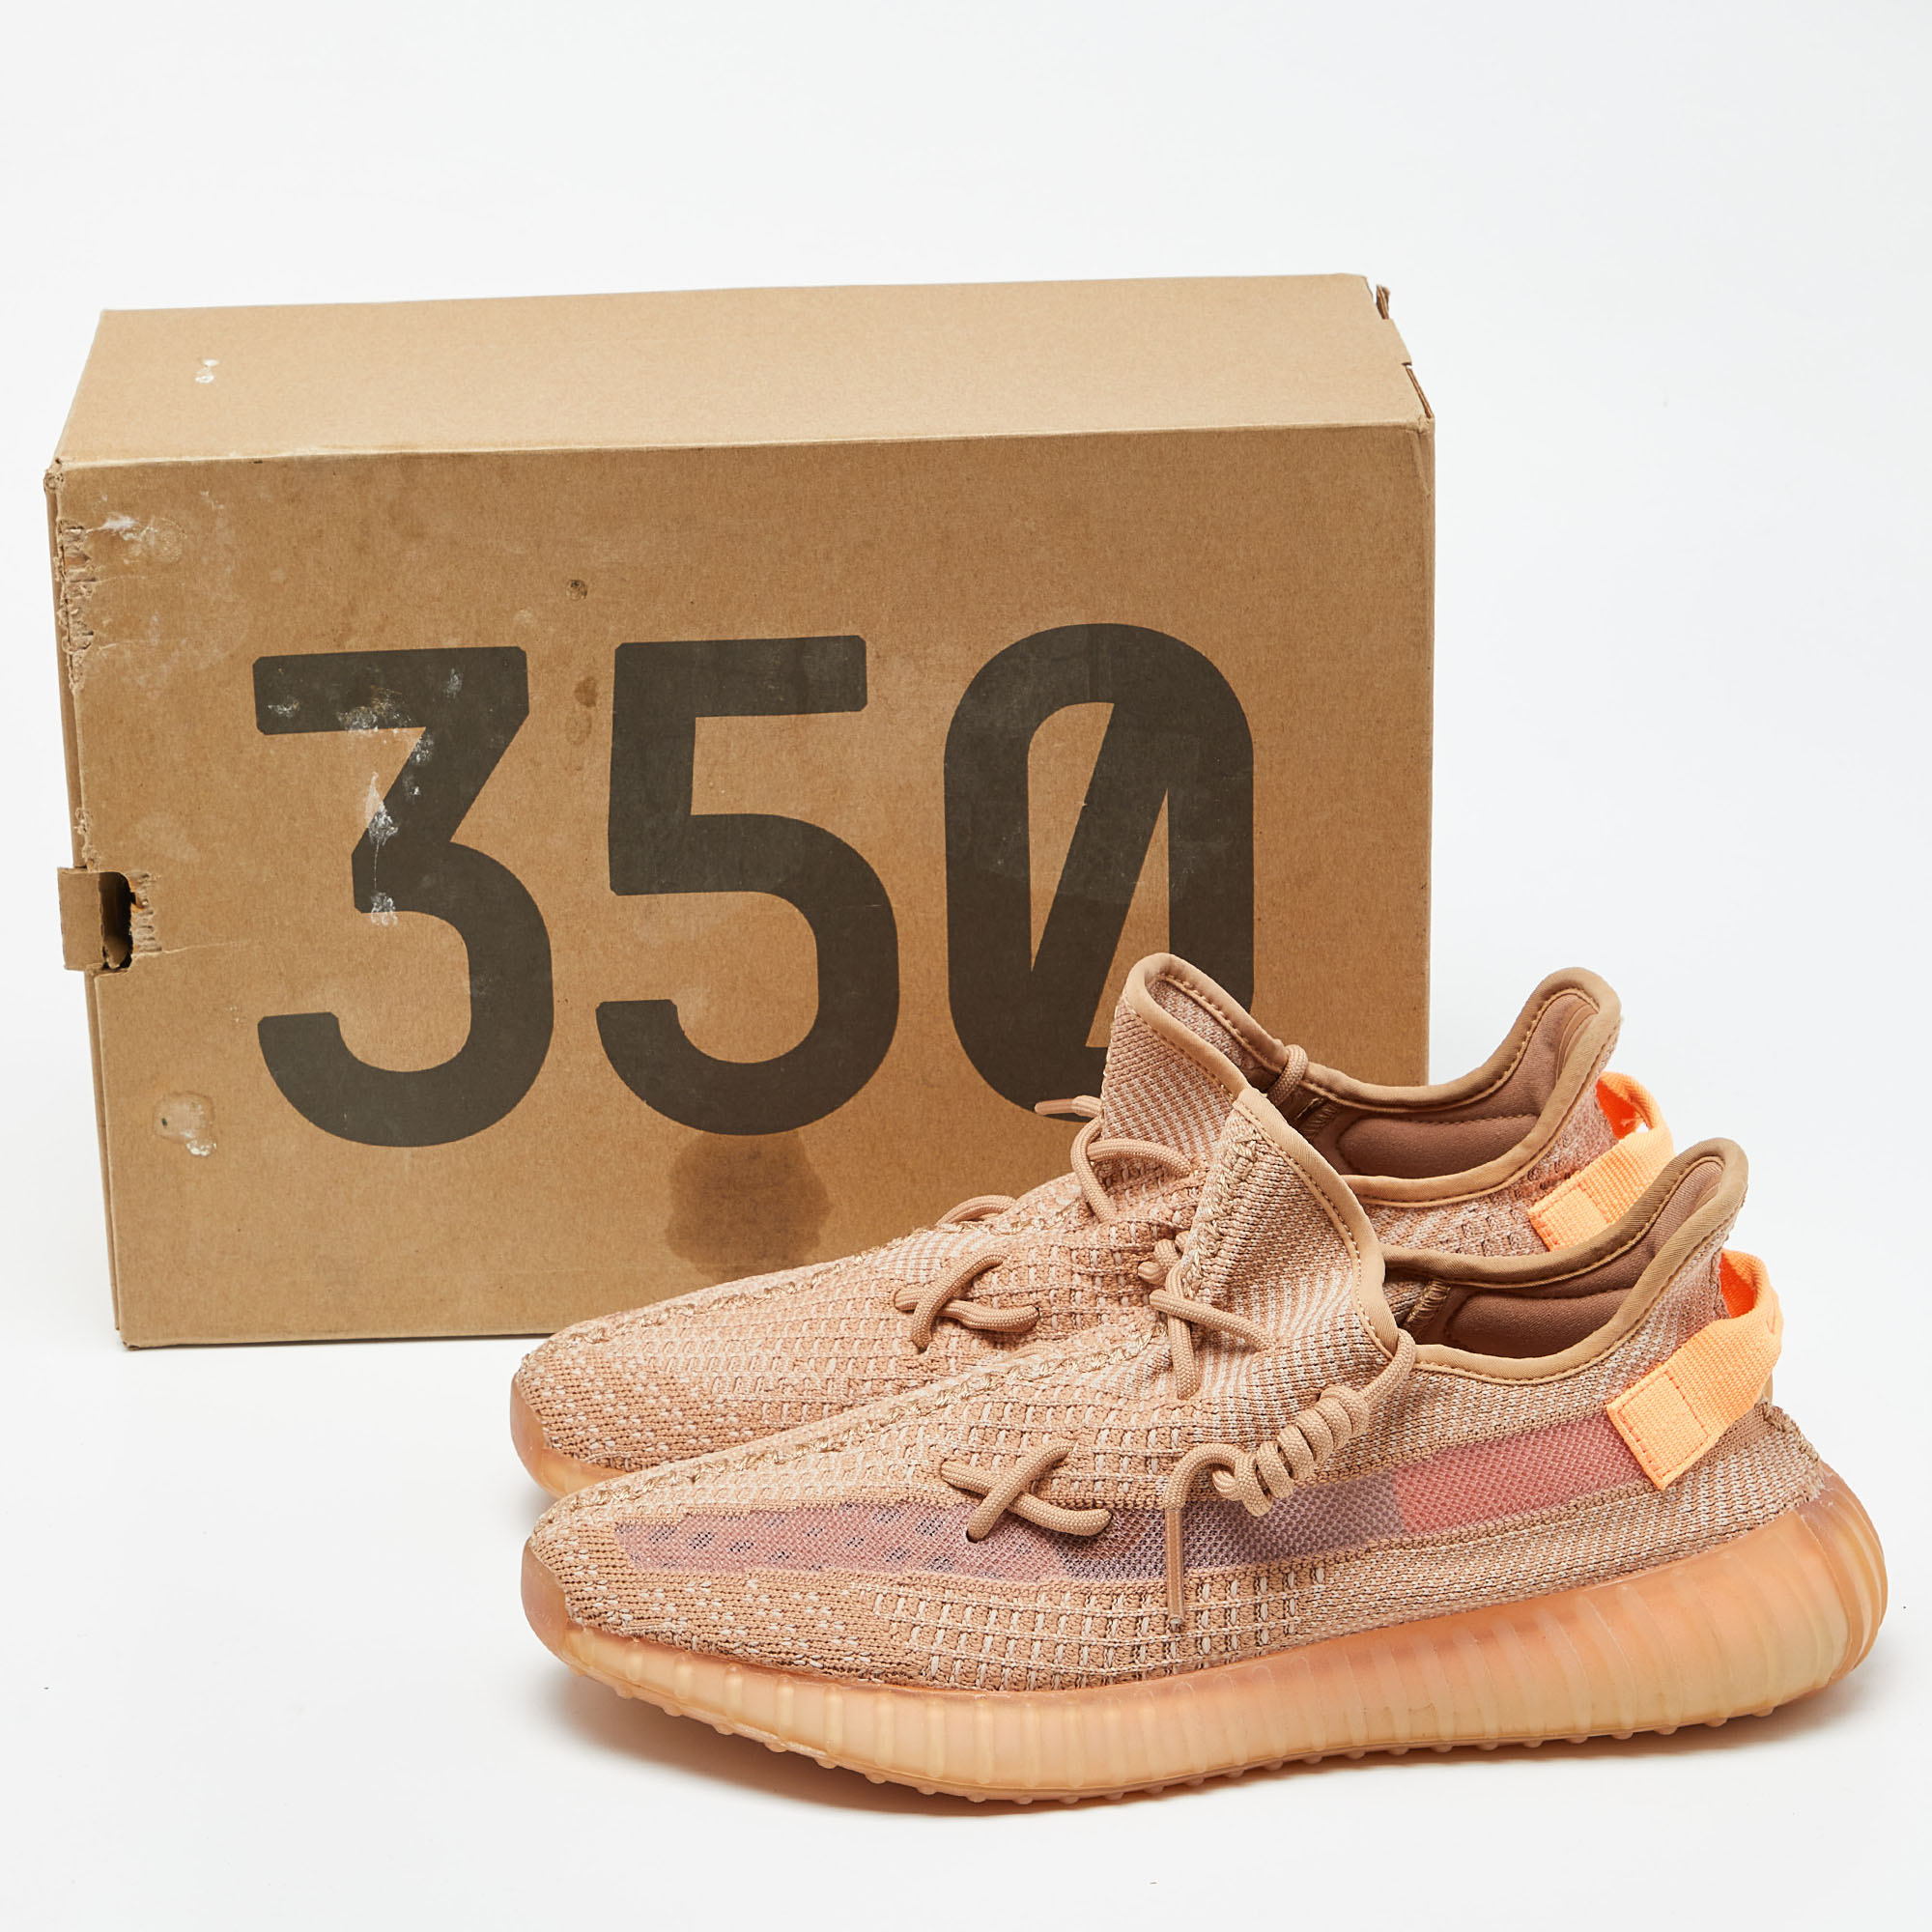 Yeezy X Adidas Orange Knit Fabric Boost 350 V2 Clay Sneakers Size 46